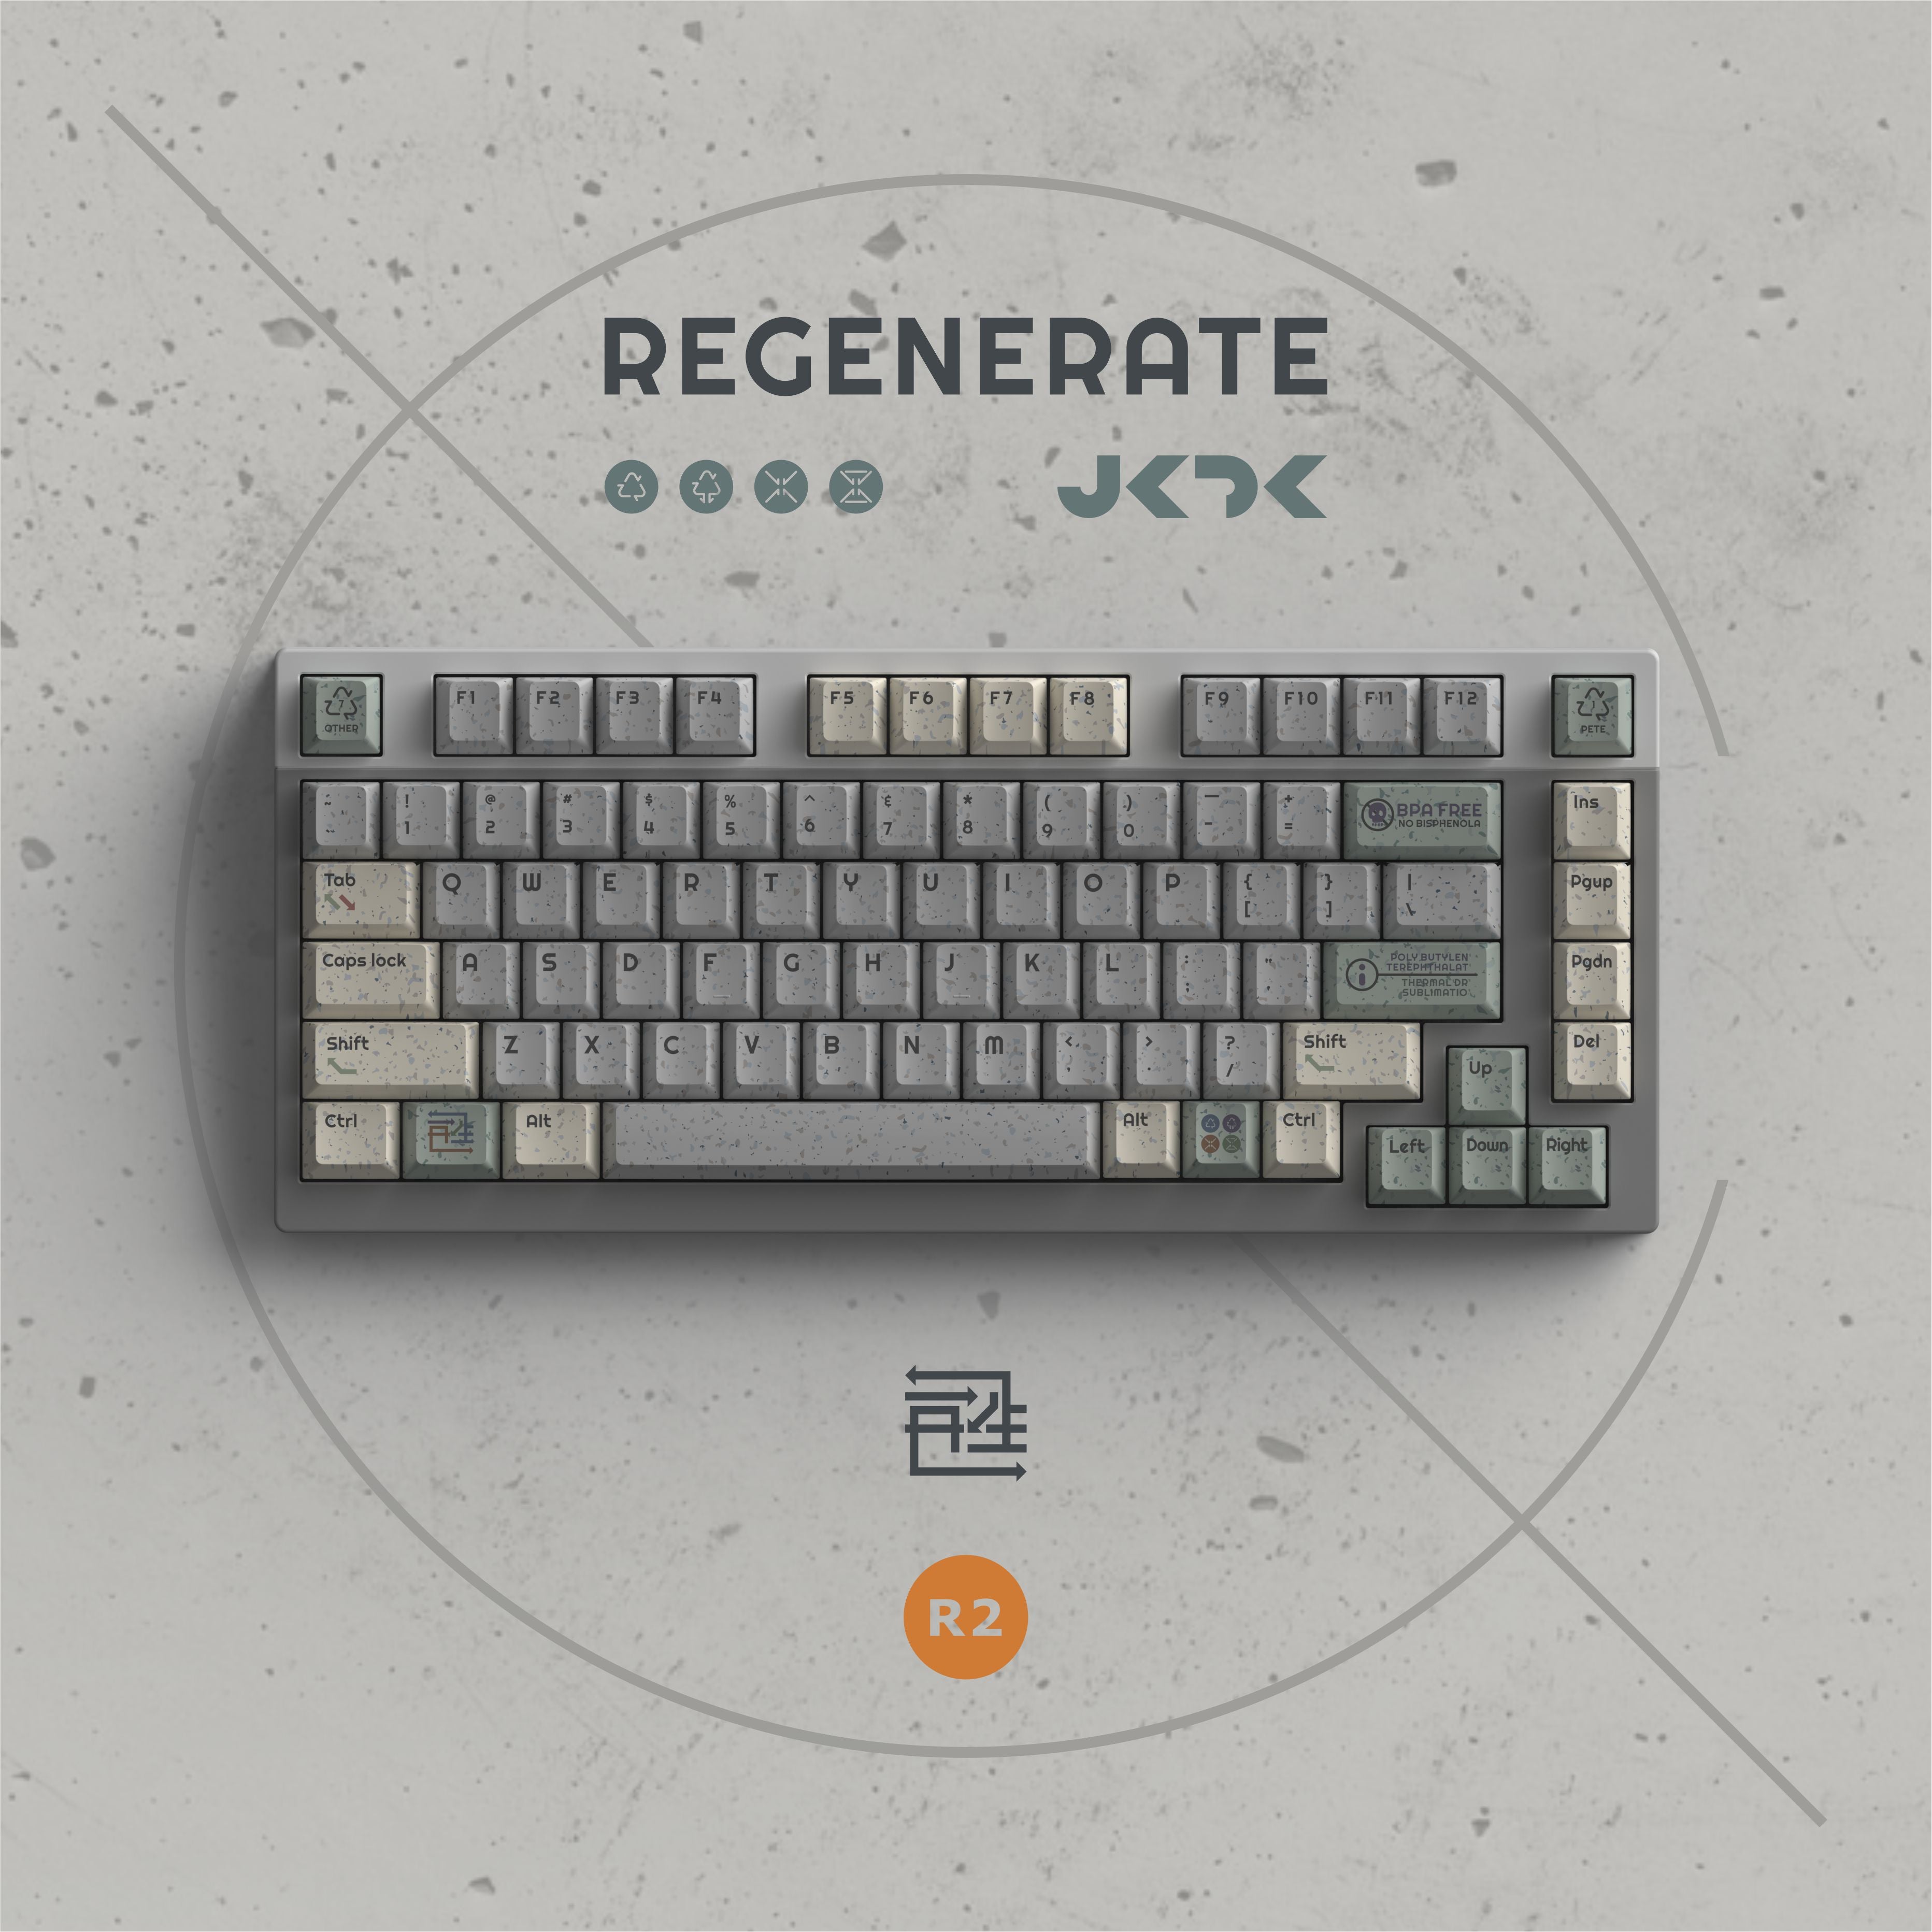 Concrete style keycaps to fit into any setup seemlessly